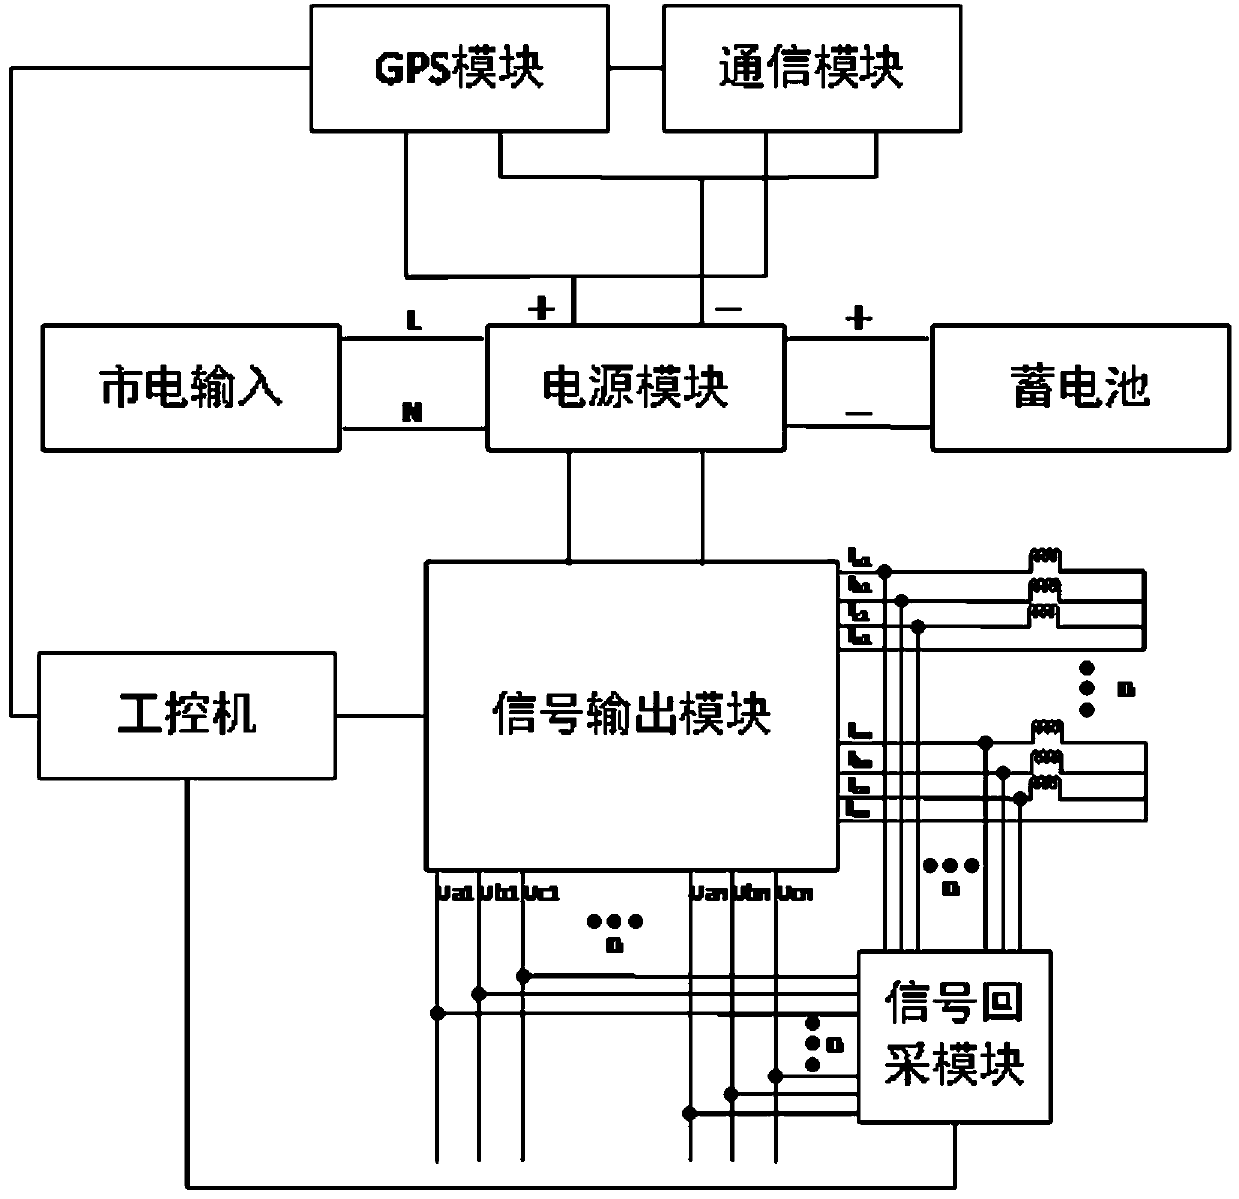 Portable fault indicator detection and distribution network fault simulation device